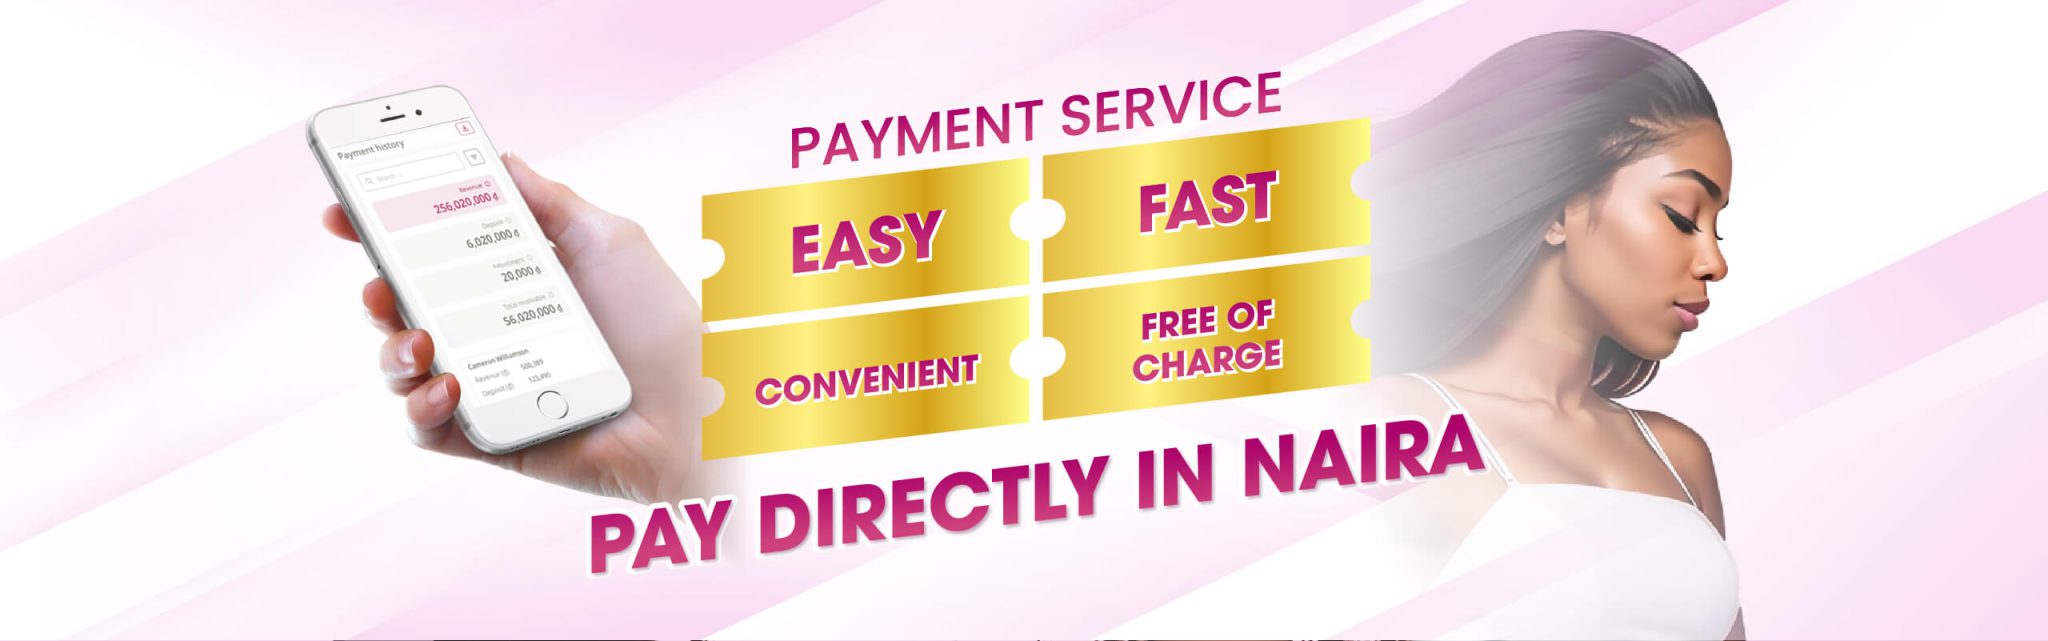 Payment Service